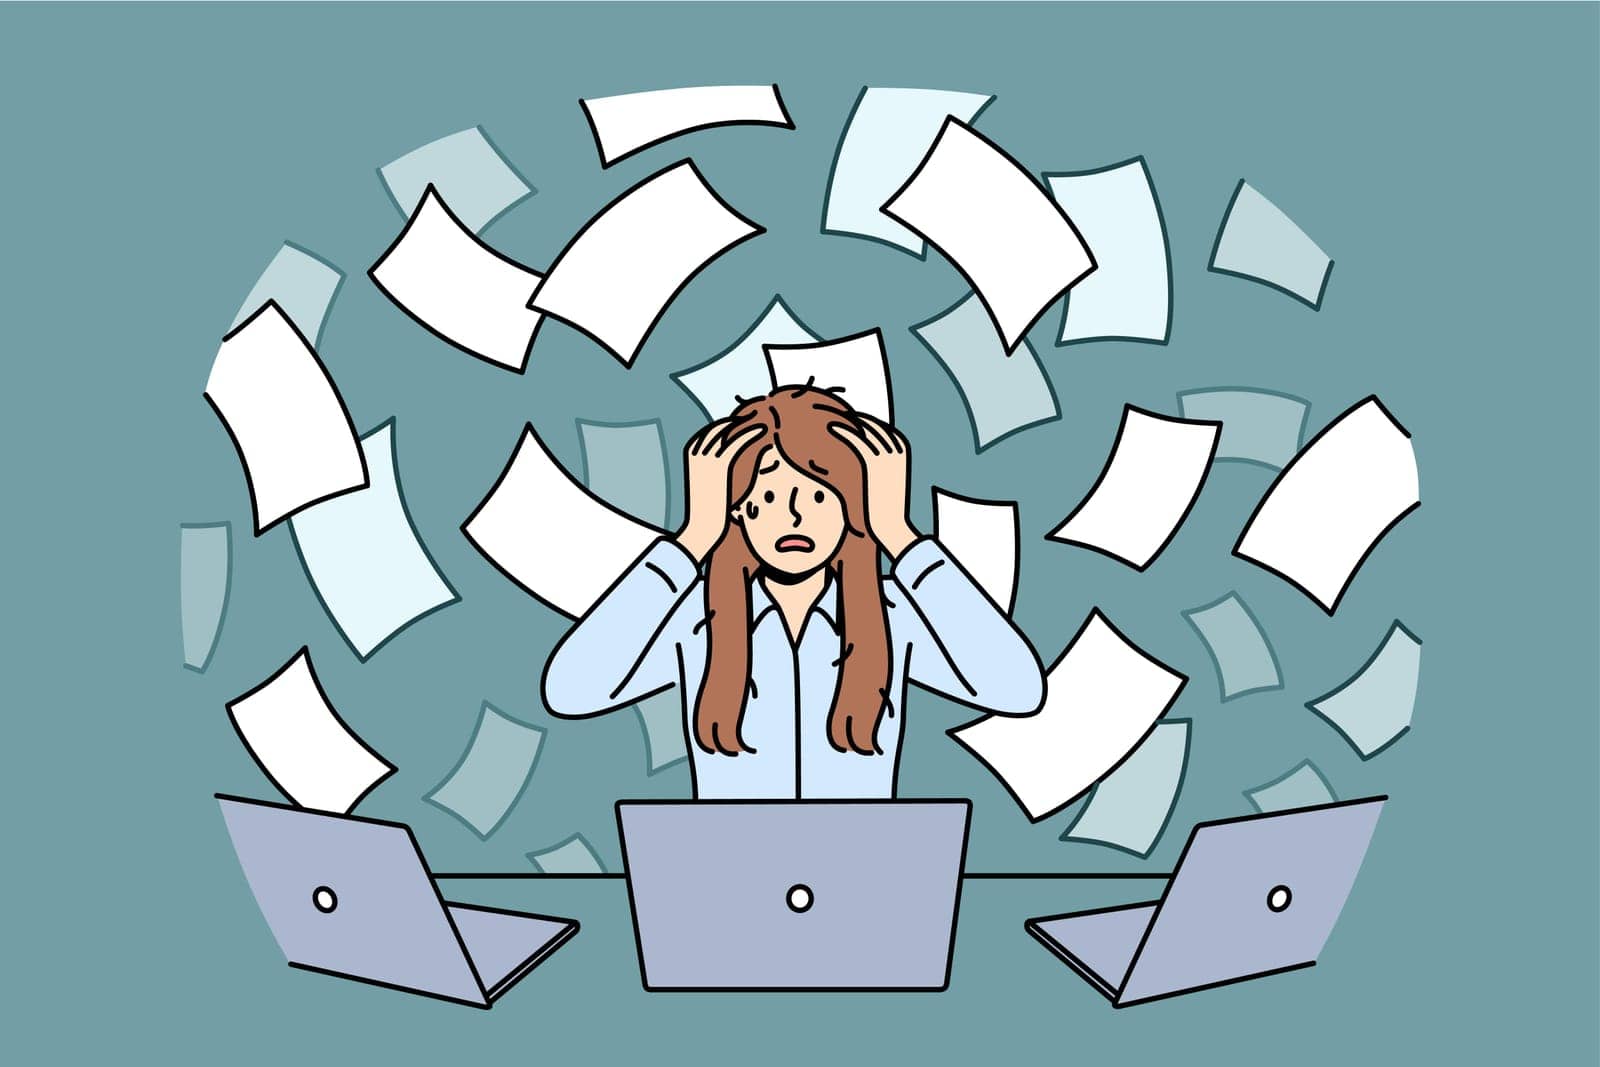 Overworked woman suffers from overload and clutches head sitting at table with laptops, among flying documents. Overworked secretary girl experiences stress and panic seeing volume of paperwork